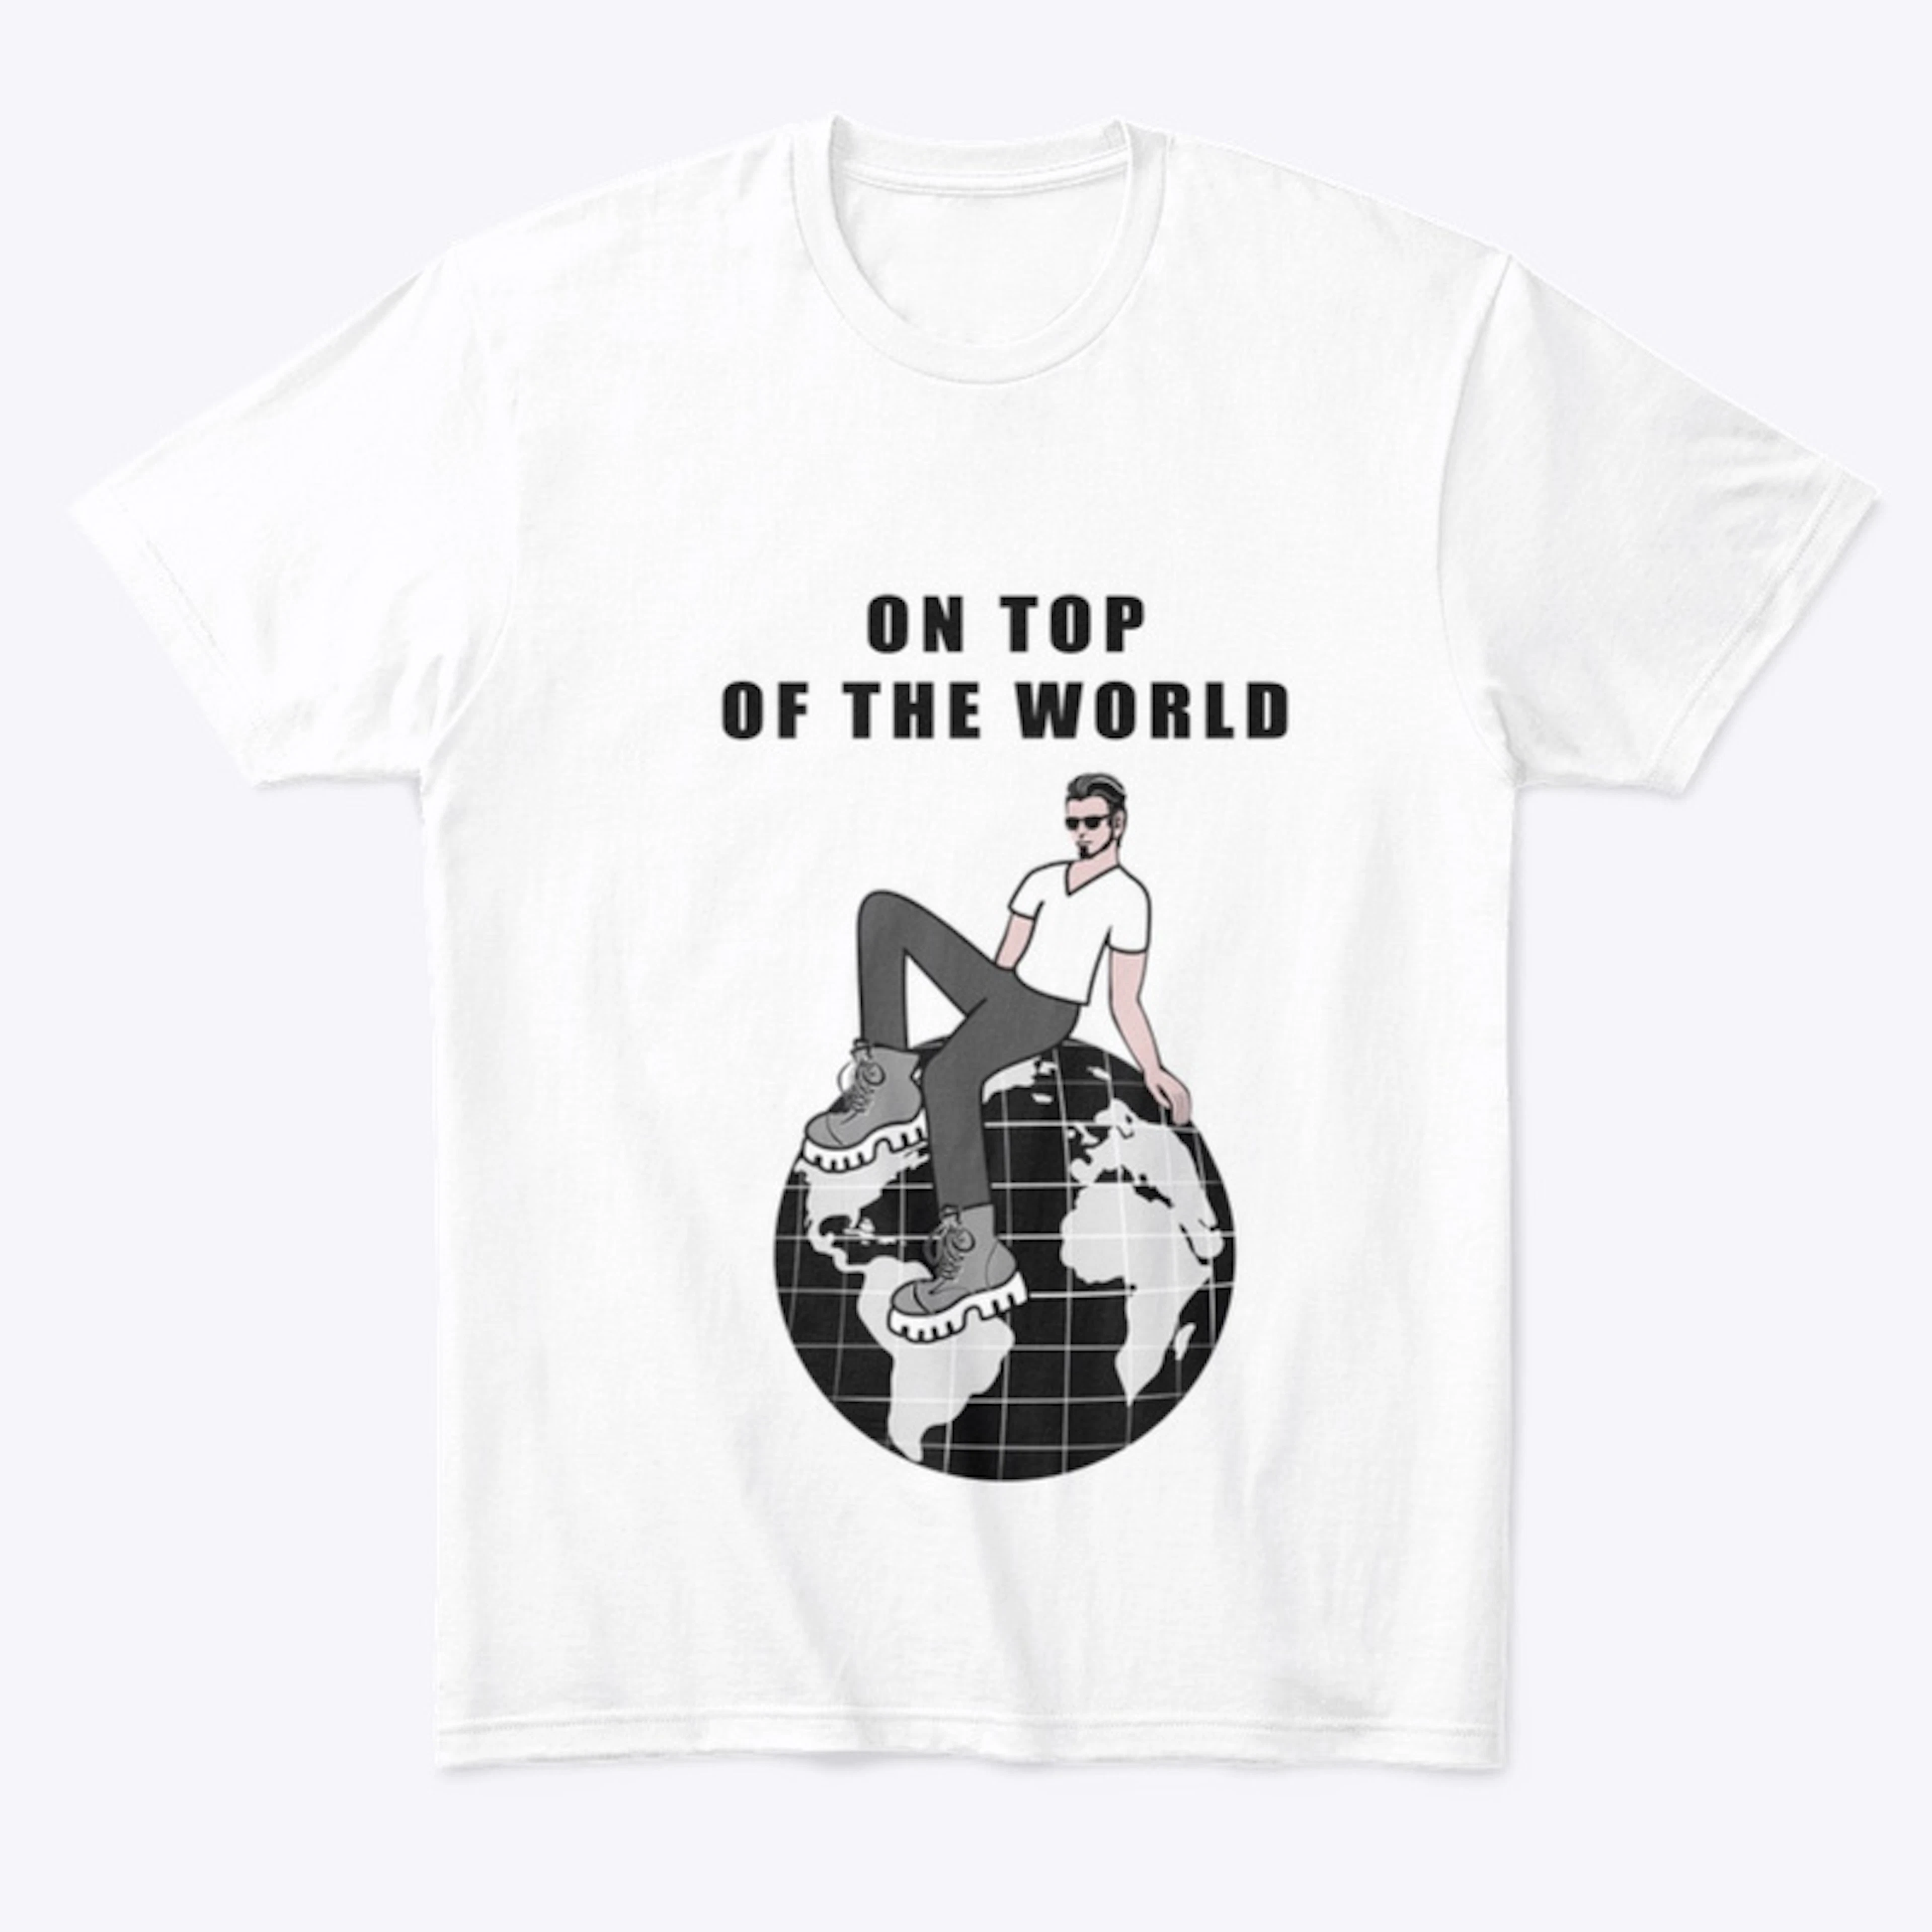 On top of the world front and back print